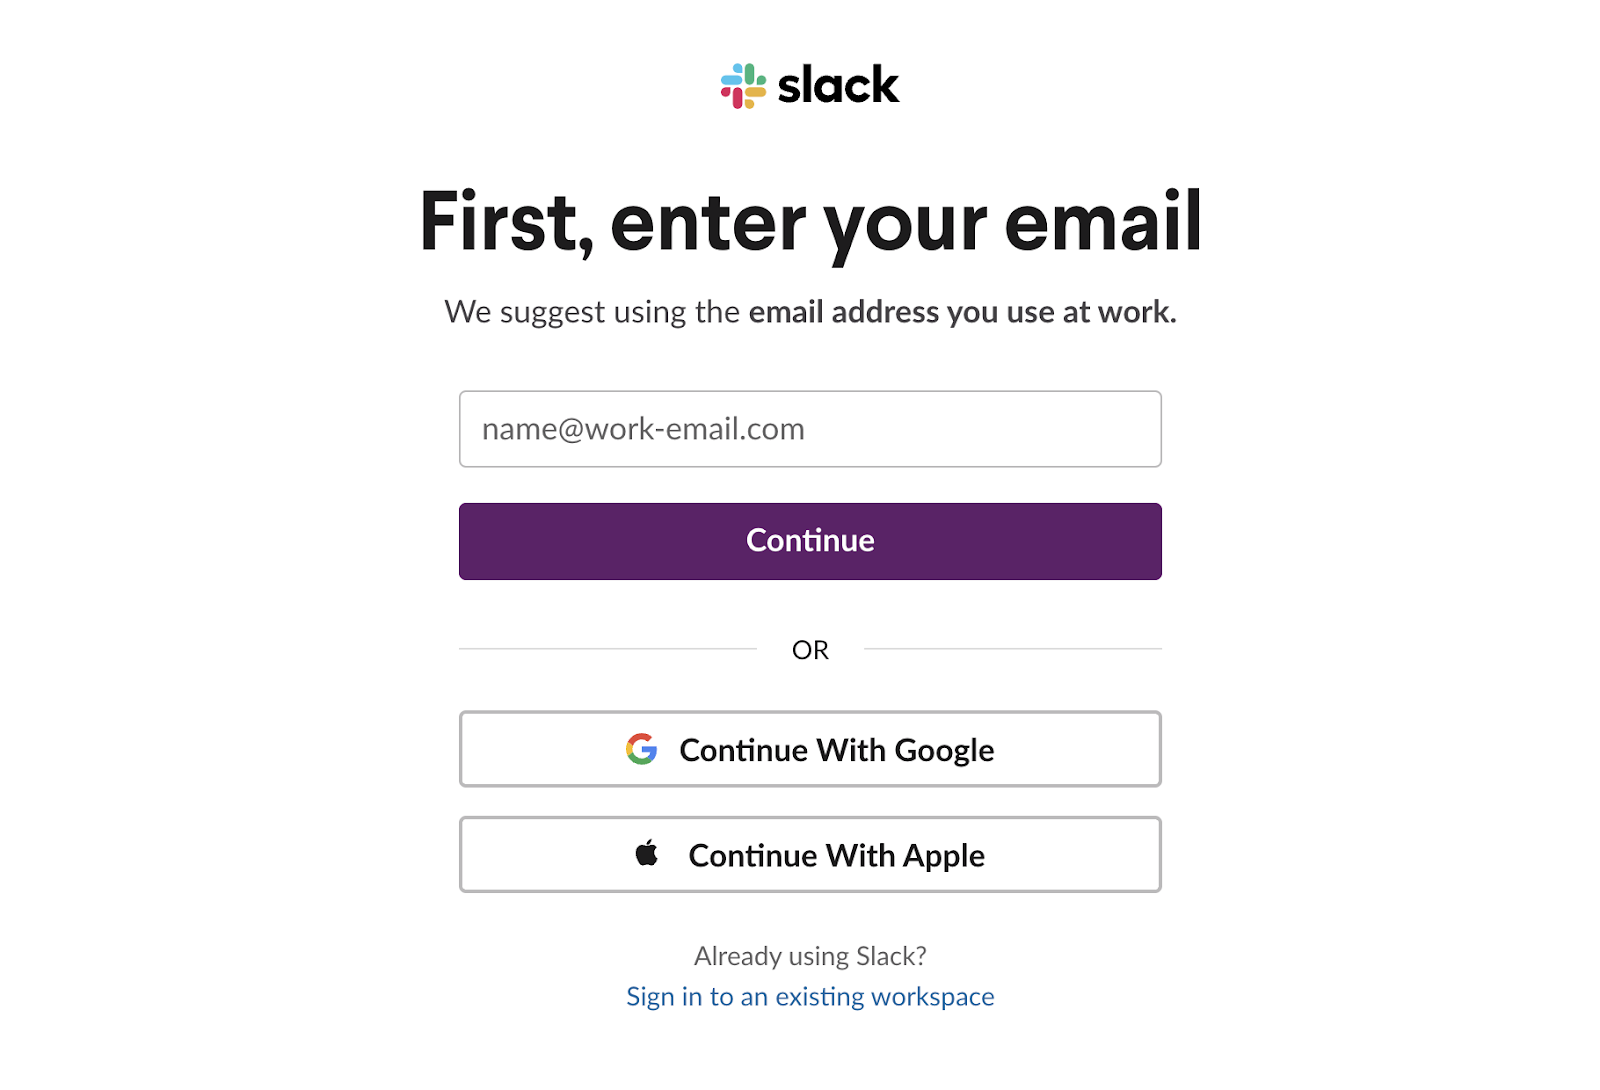 "First, enter your email" pop up window in Slack